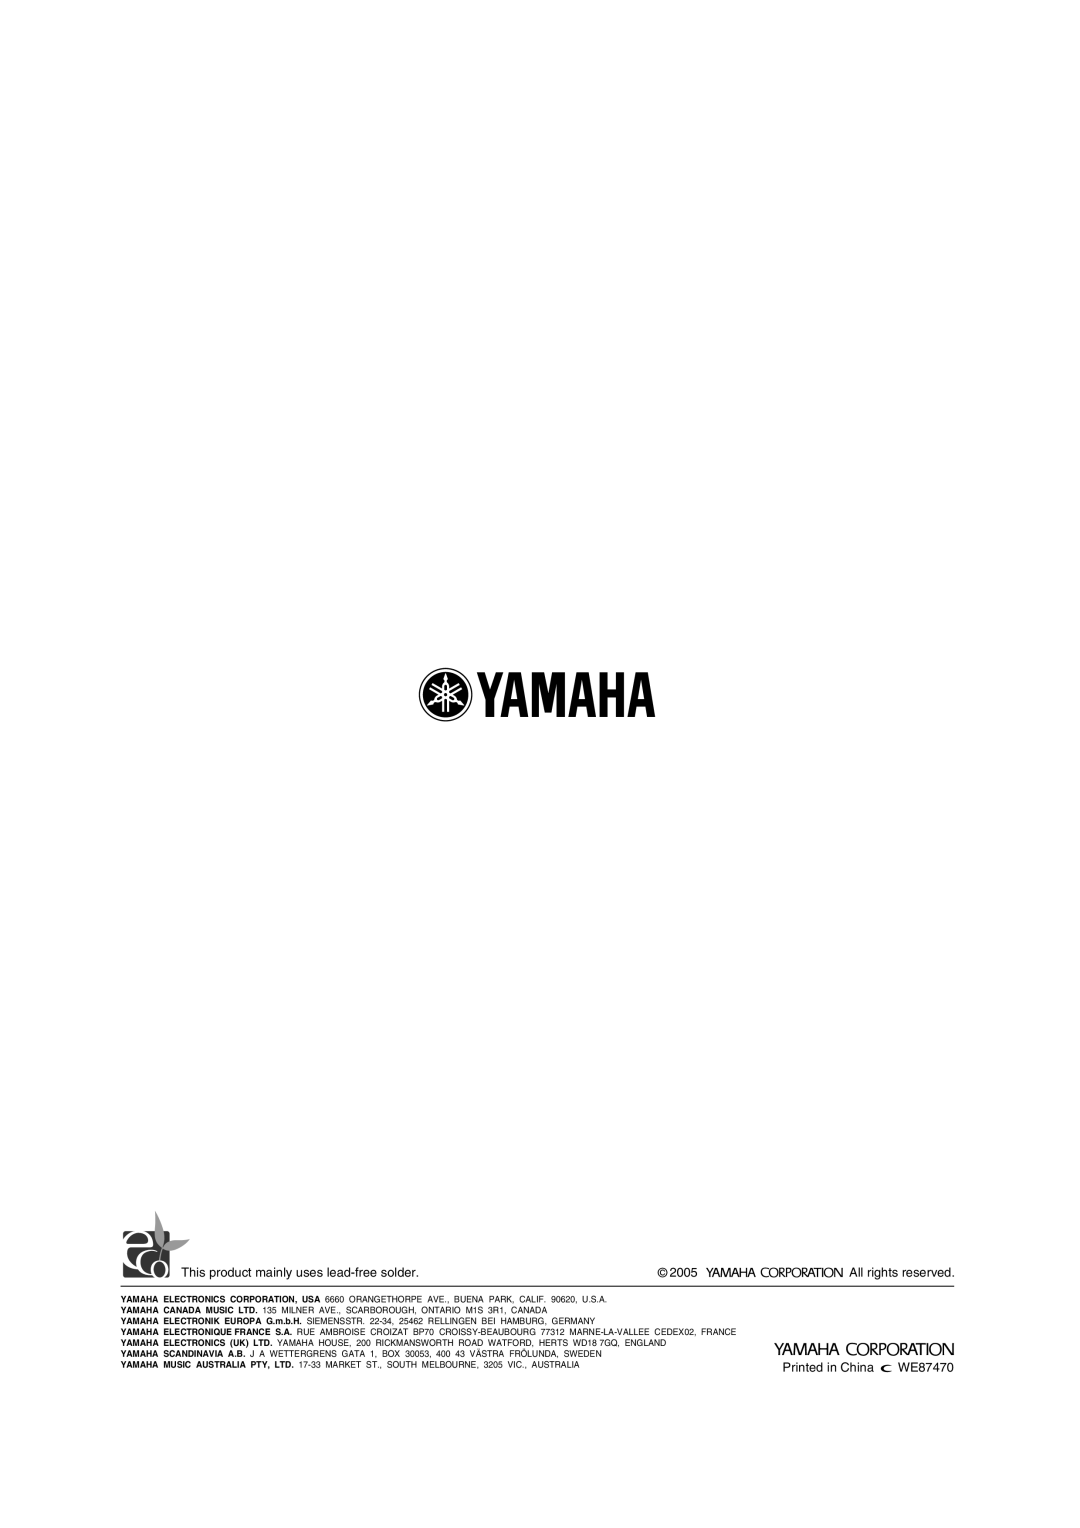 Yamaha YST-SW011 owner manual This product mainly uses lead-freesolder, 2005, All rights reserved 